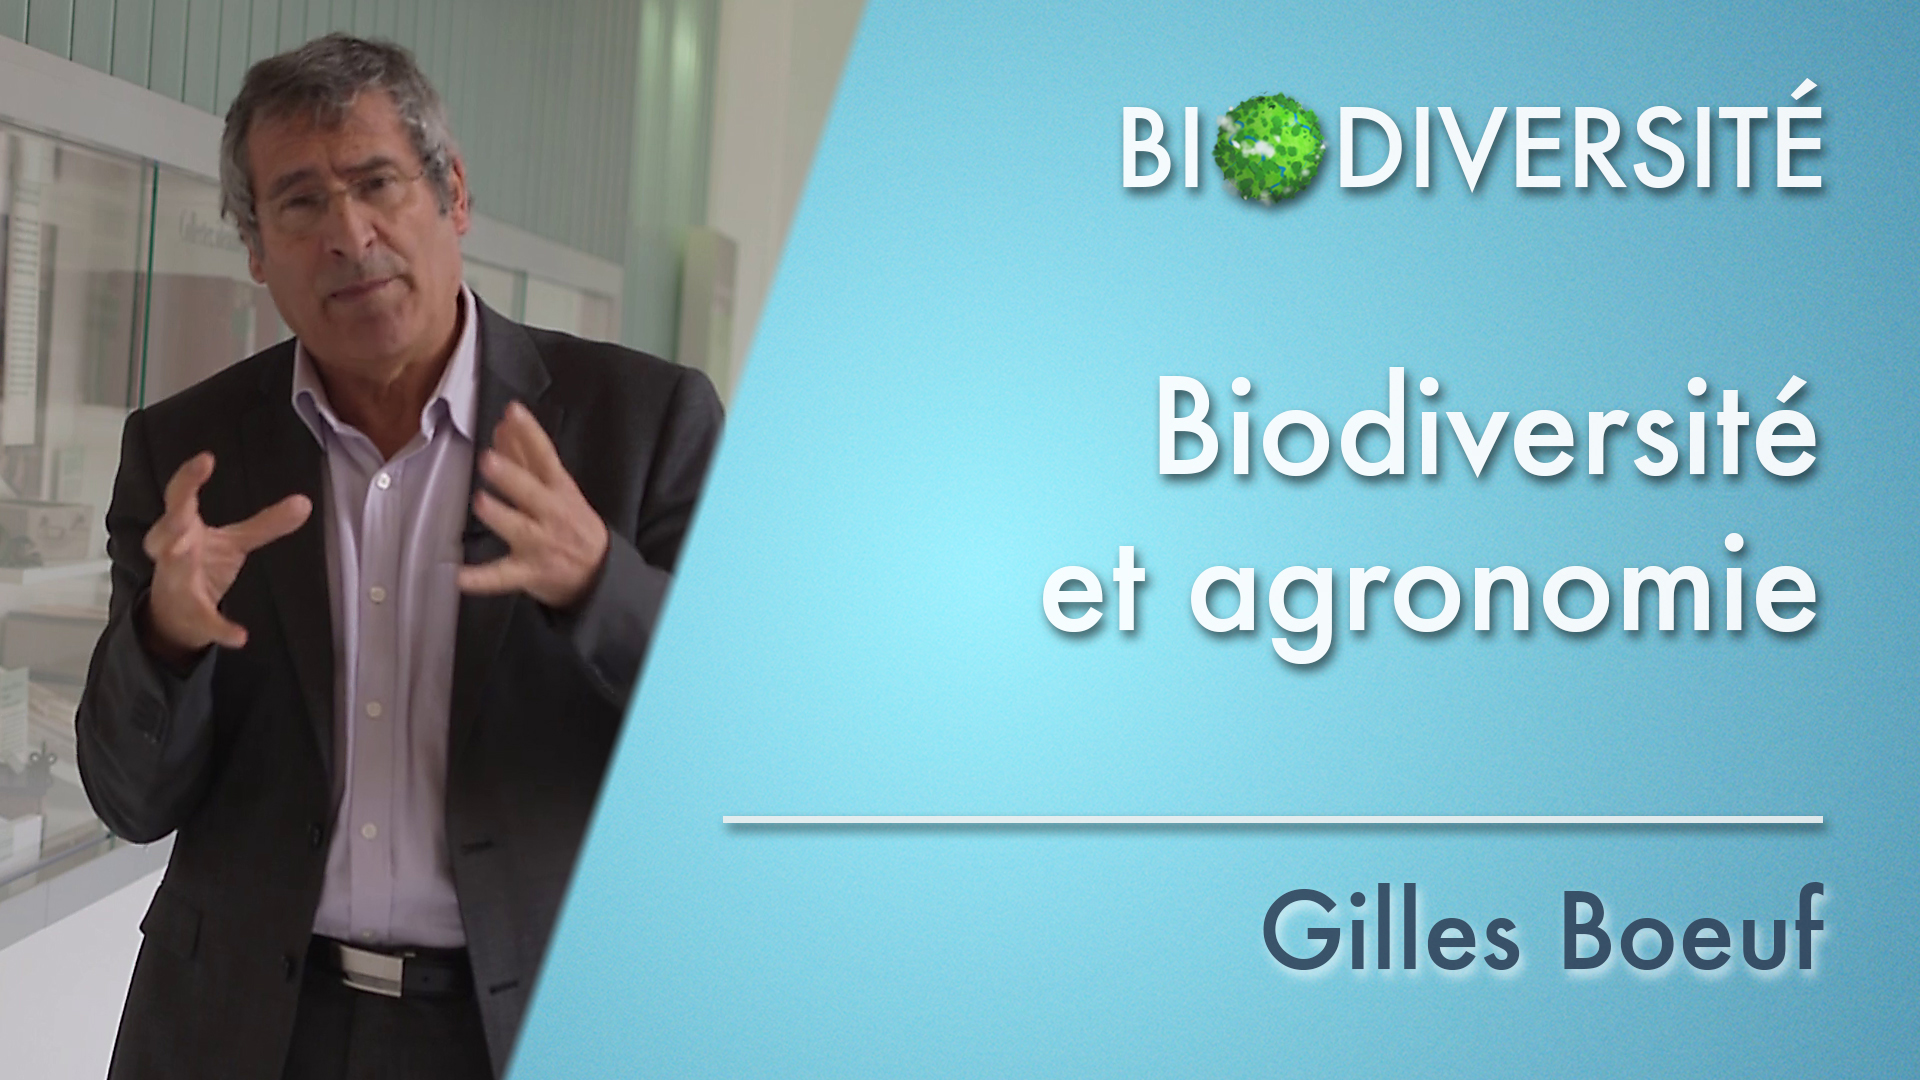 Biodiversity and agronomy - Introduction